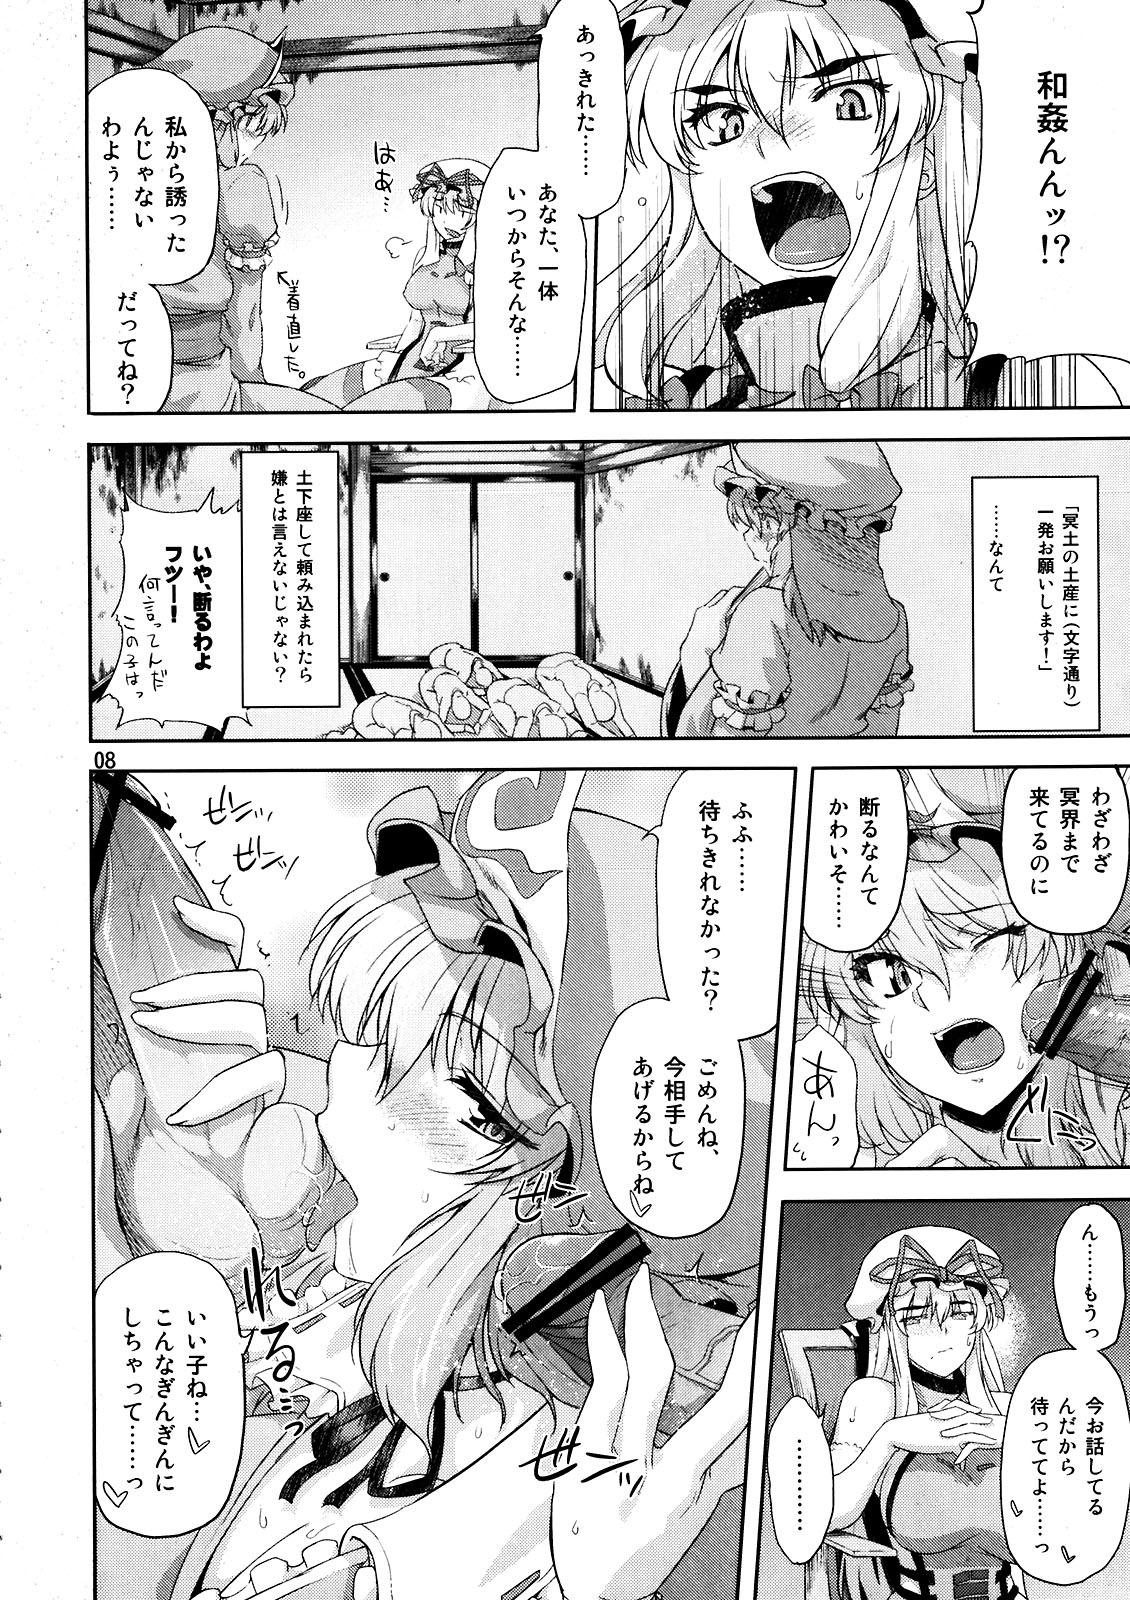 Best Toshimaen 0 - Touhou project Clothed Sex - Page 8